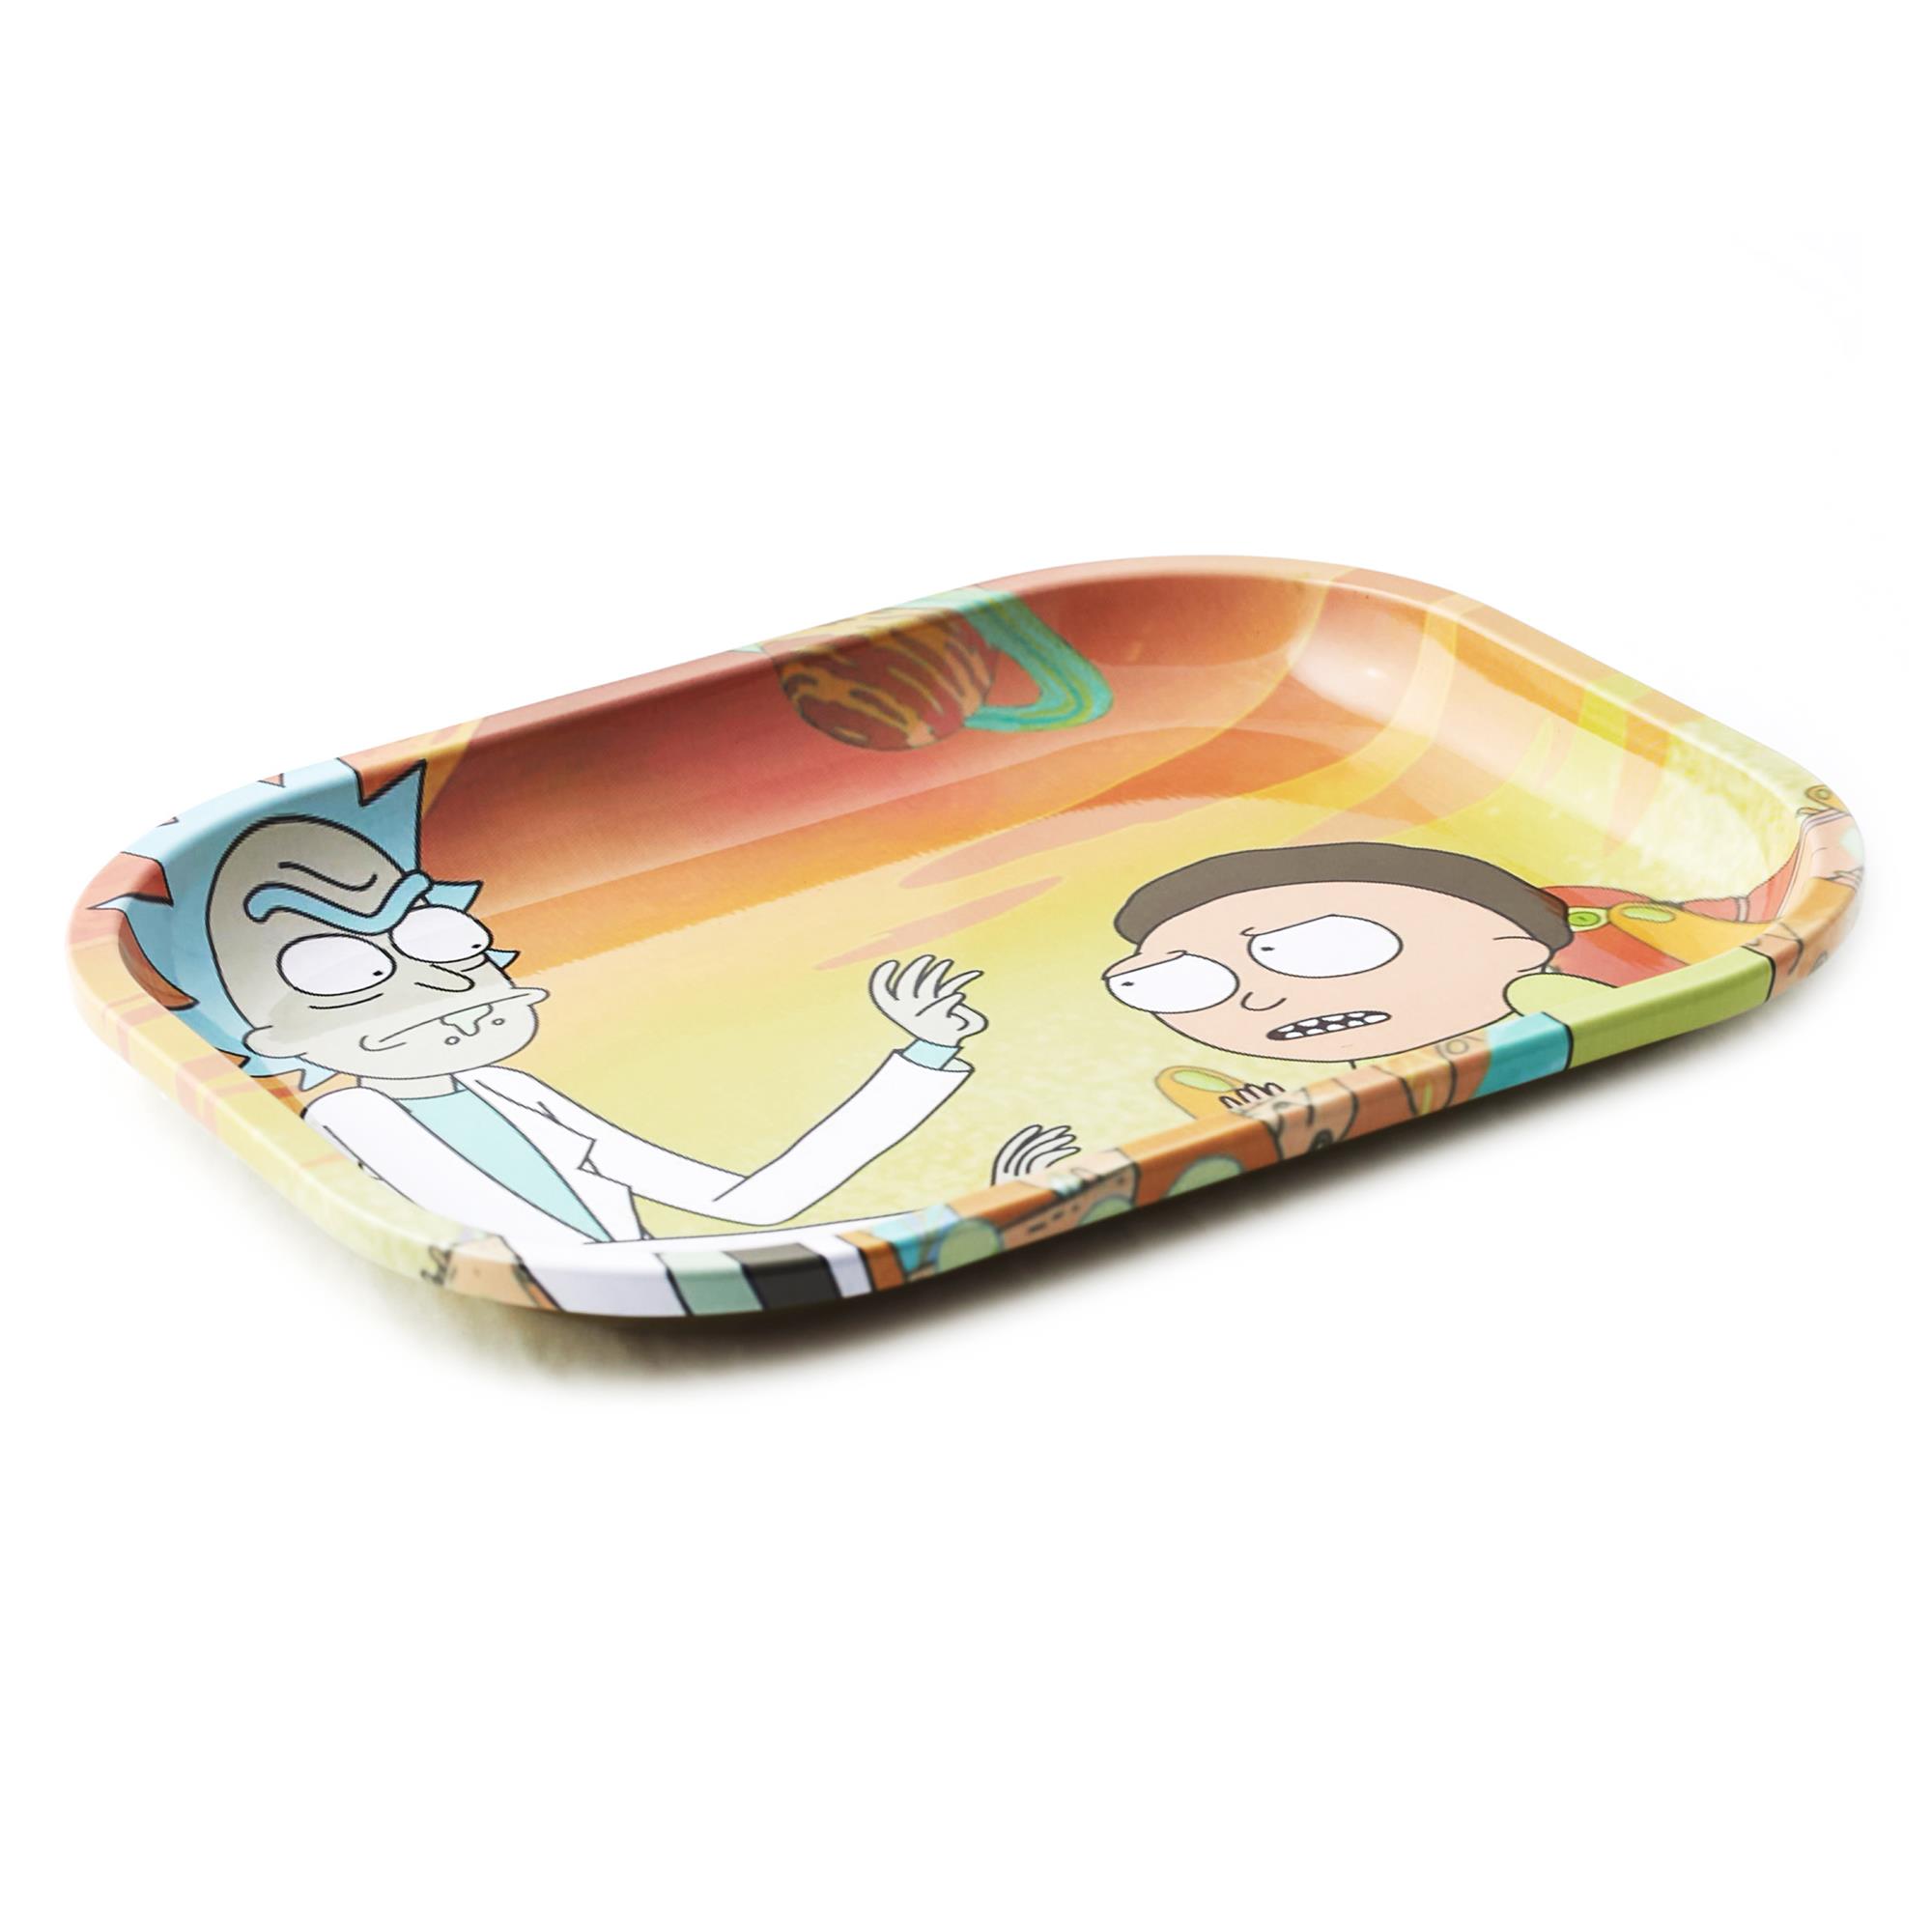 RICK & MORTY ARGUING TRAY